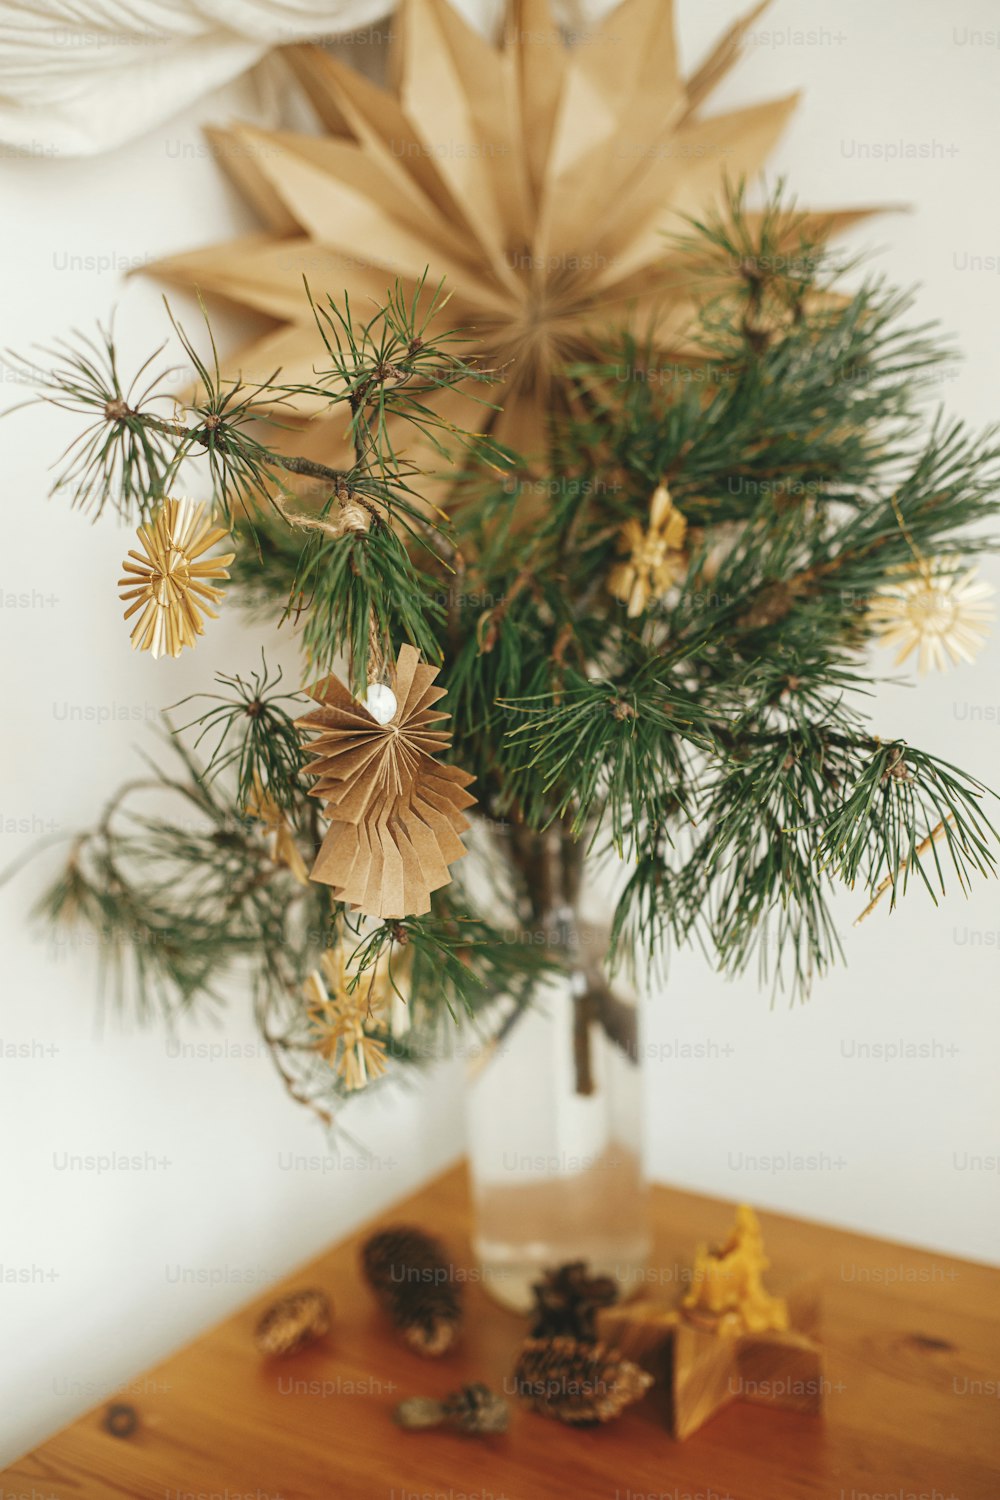 Stylish christmas star straw ornaments and paper angel on pine branches on table in vase on background sweden star. Festive decorated scandinavian room. Eco plastic free decorations